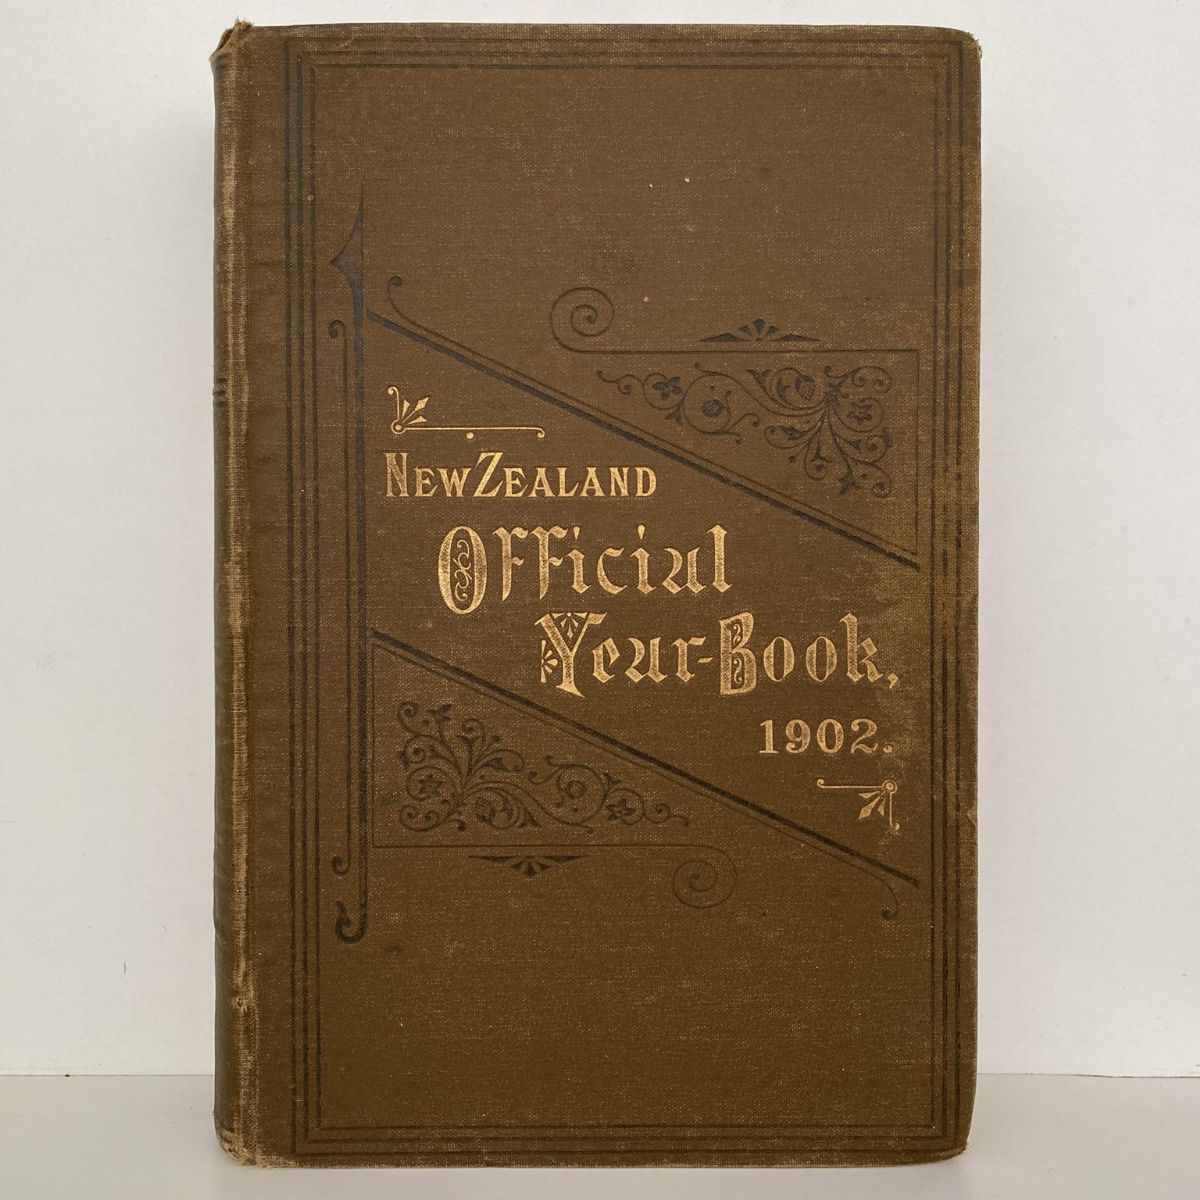 The New Zealand Official Year-Book 1902